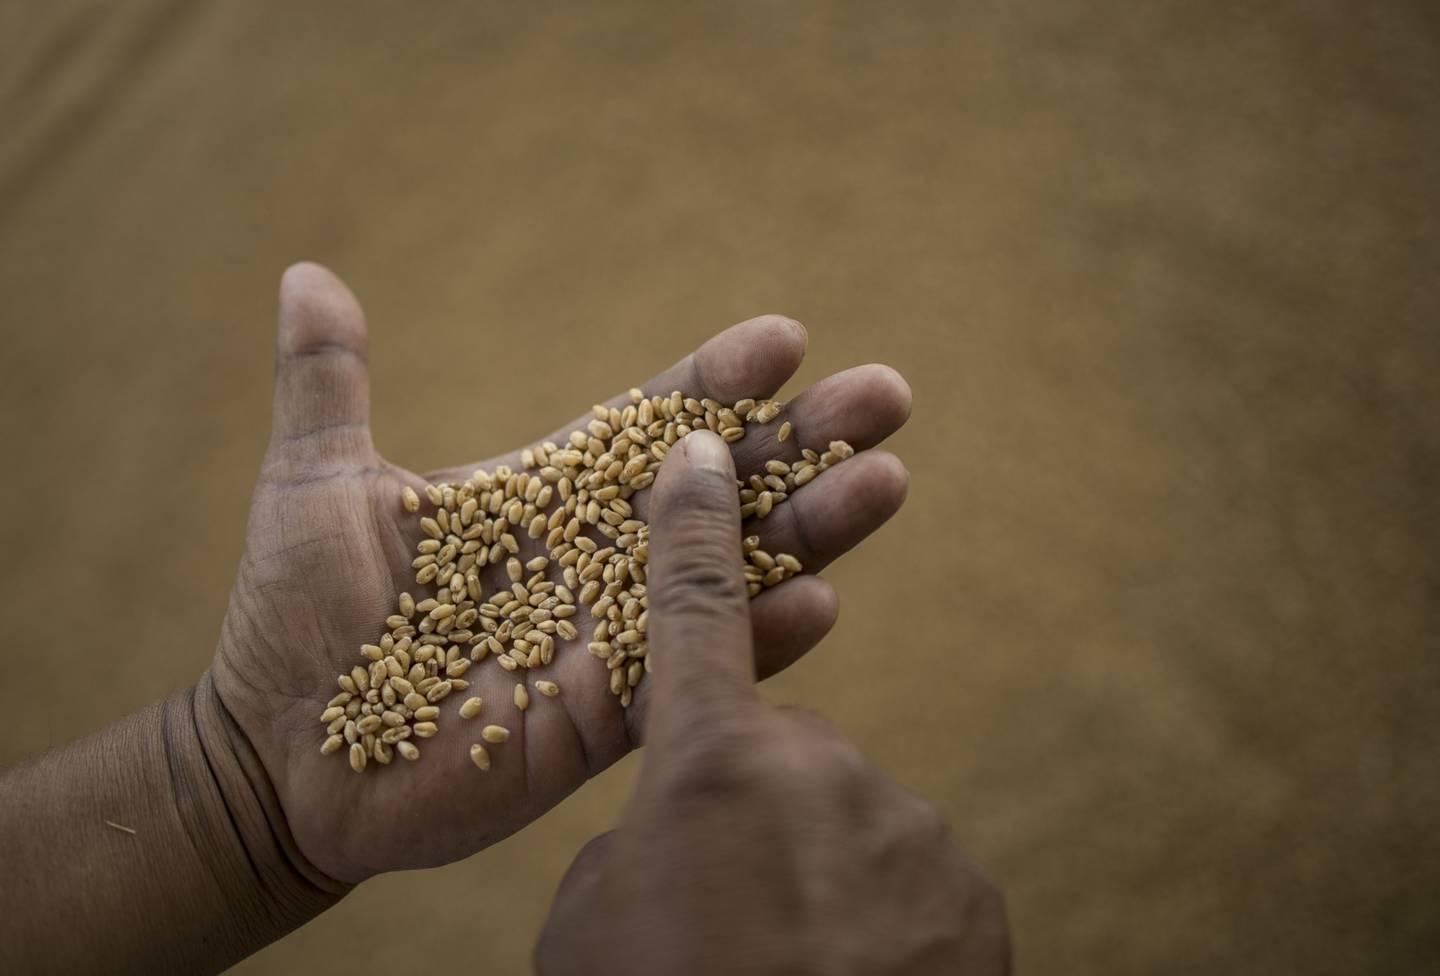 A buyer examines the quality of wheat grains at a wholesale market in the Narela district of New Delhi, India.